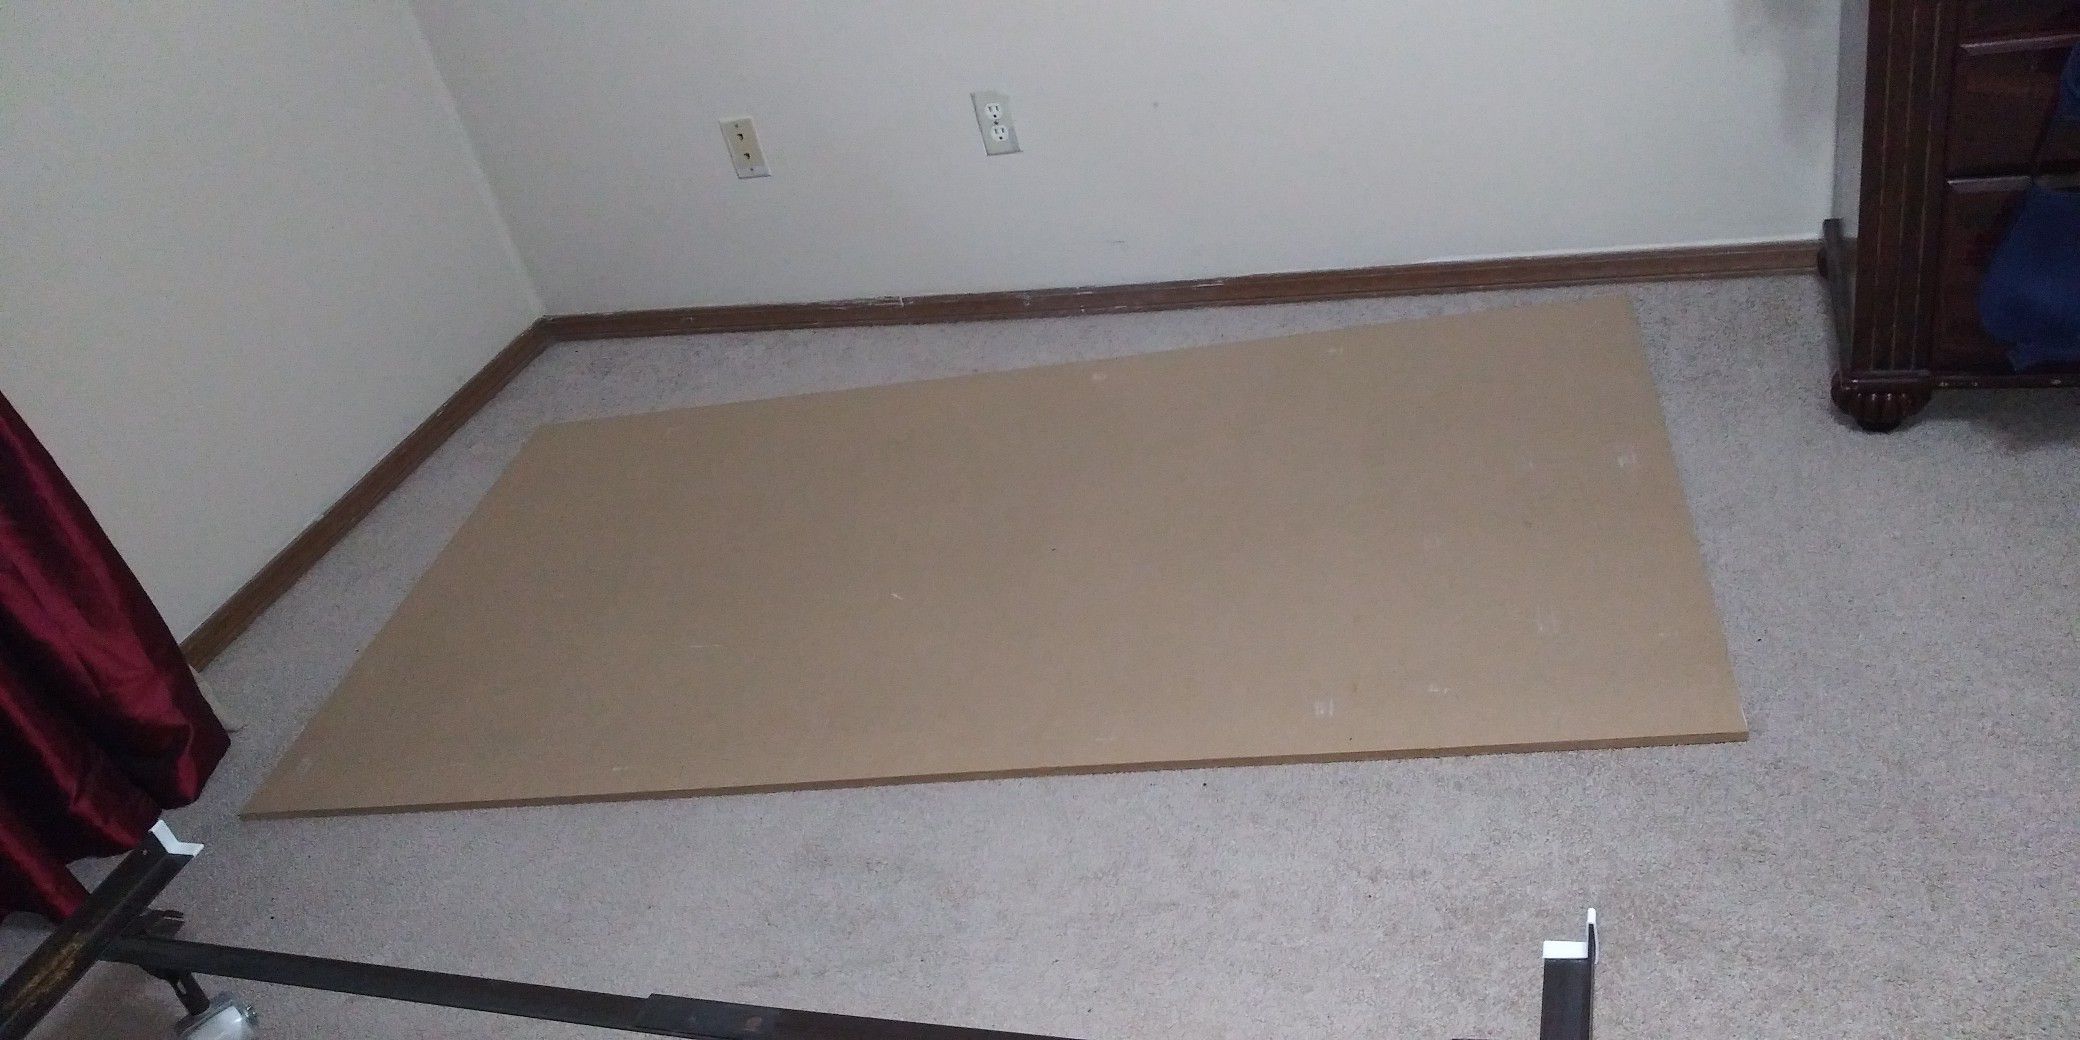 Hard board... It came with a twin sized bed